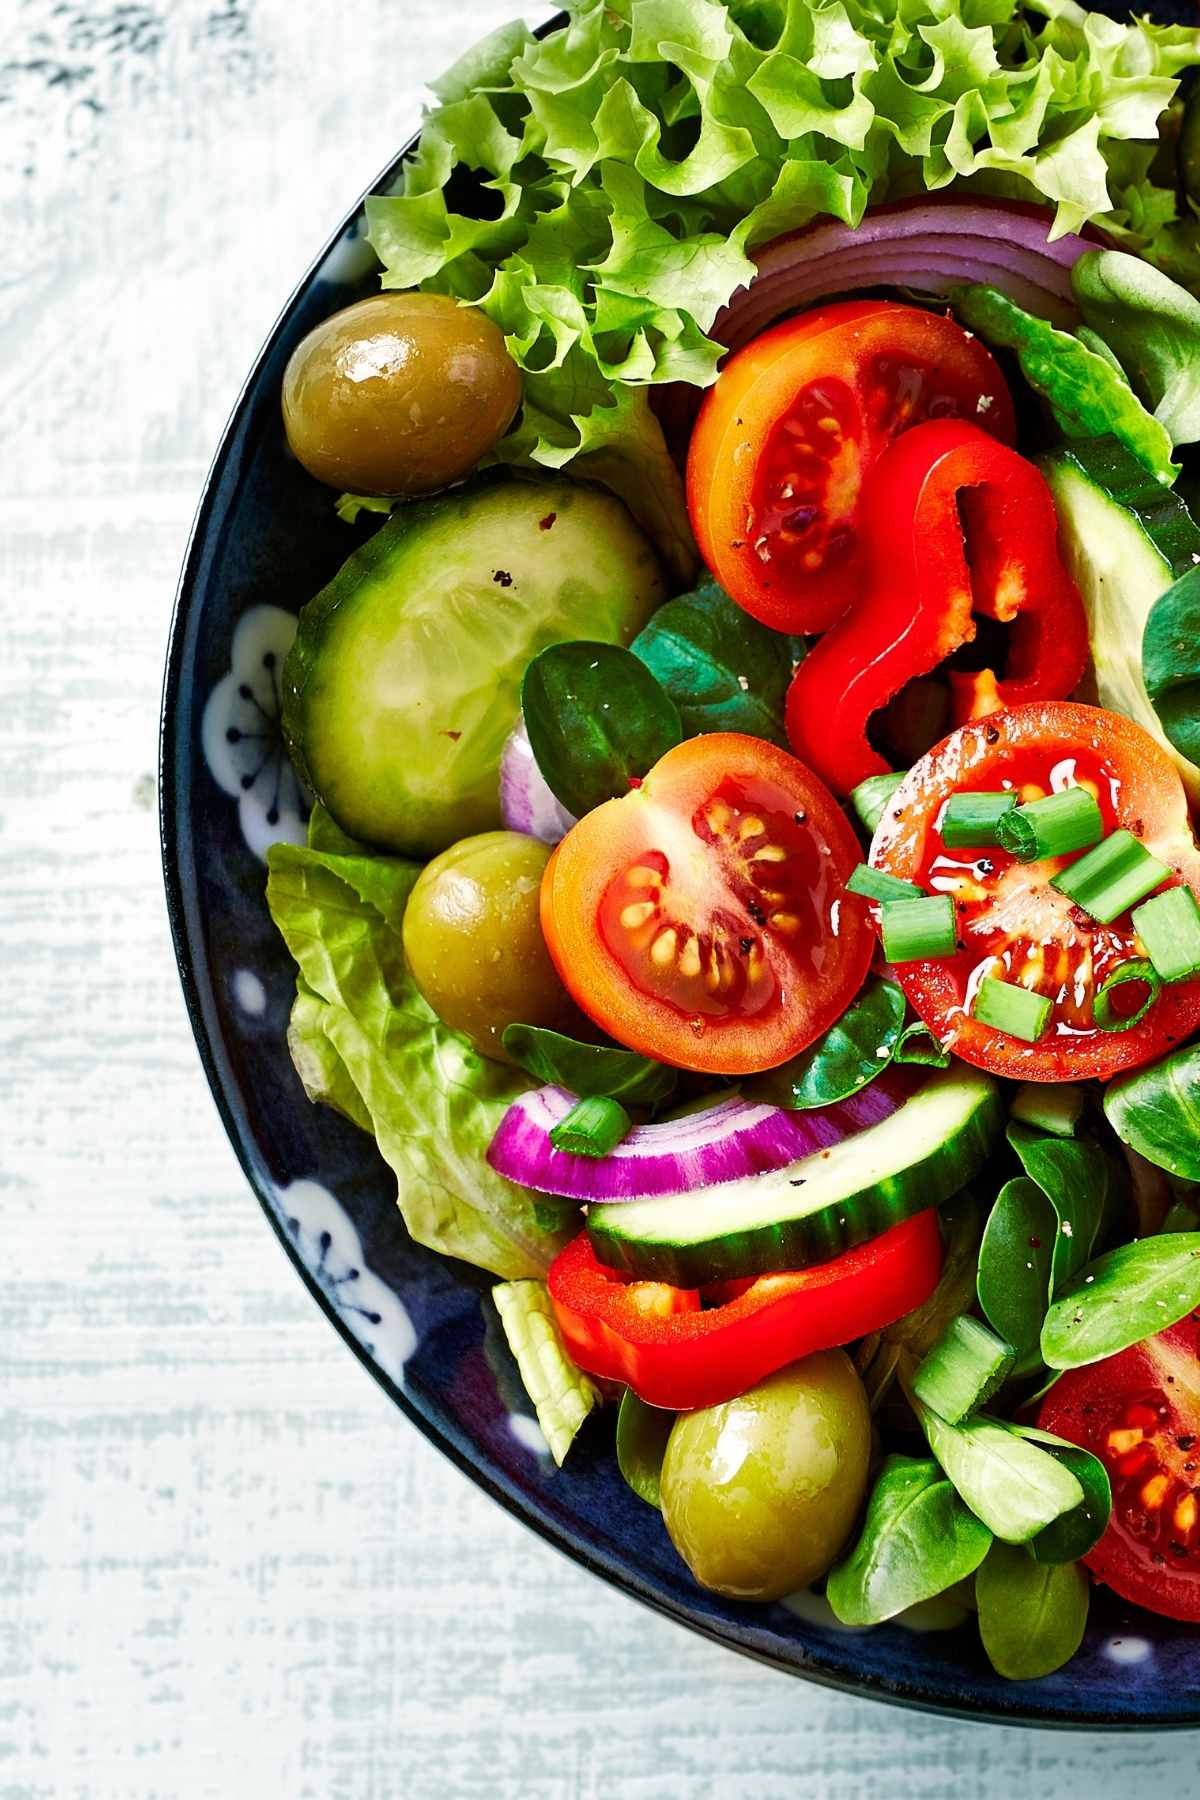 Lettuce Salad with Tomato and Cucumber